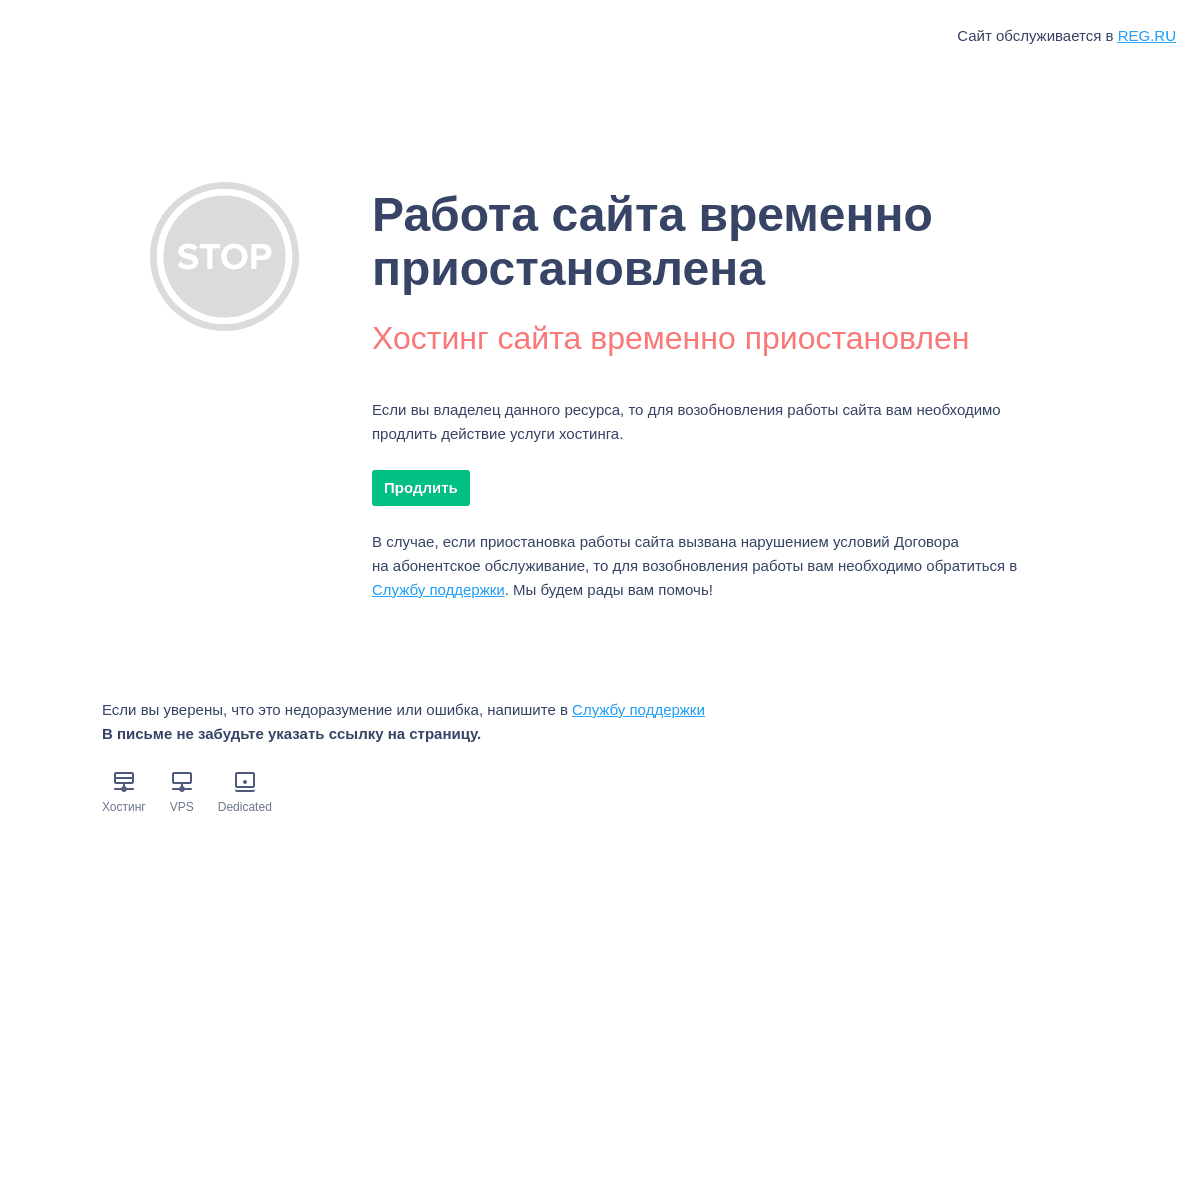 A complete backup of https://i-rs.ru